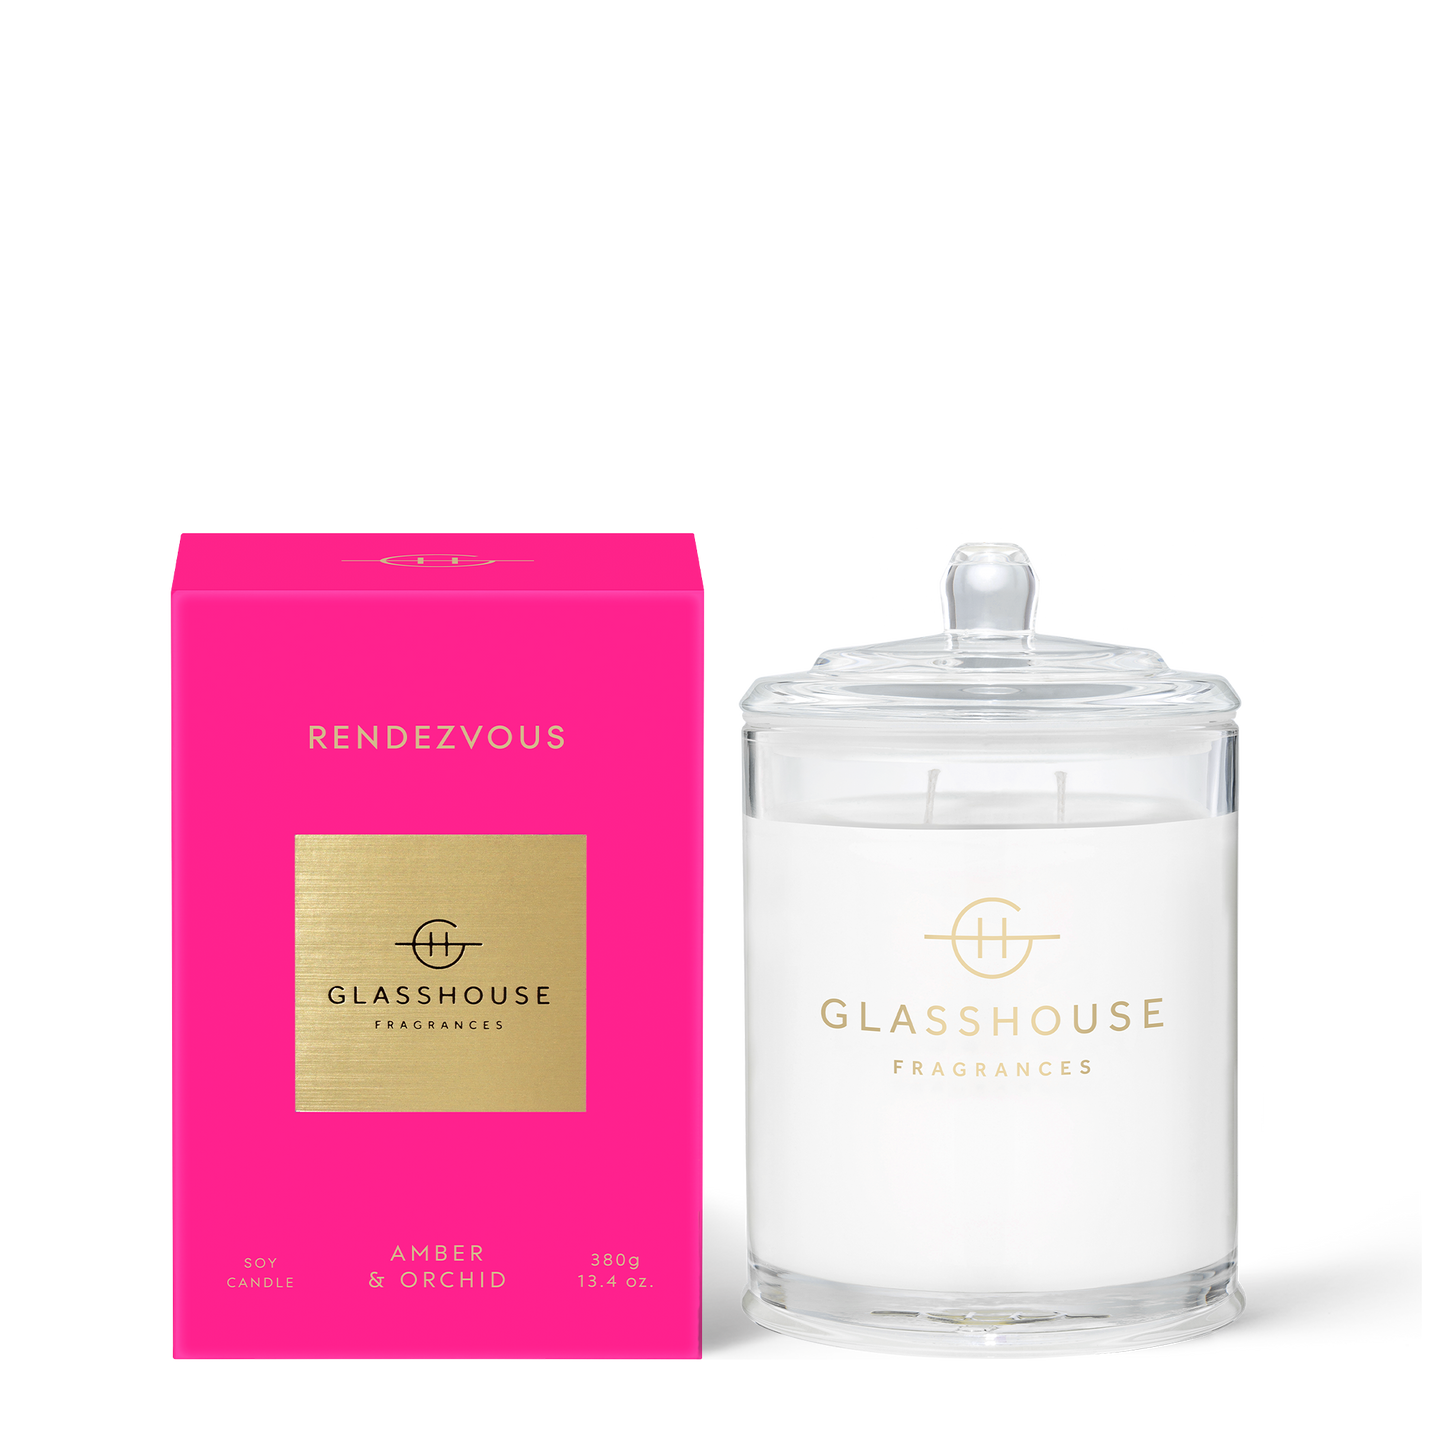 Rendezvous 380g Soy Candle - Glasshouse Fragrances